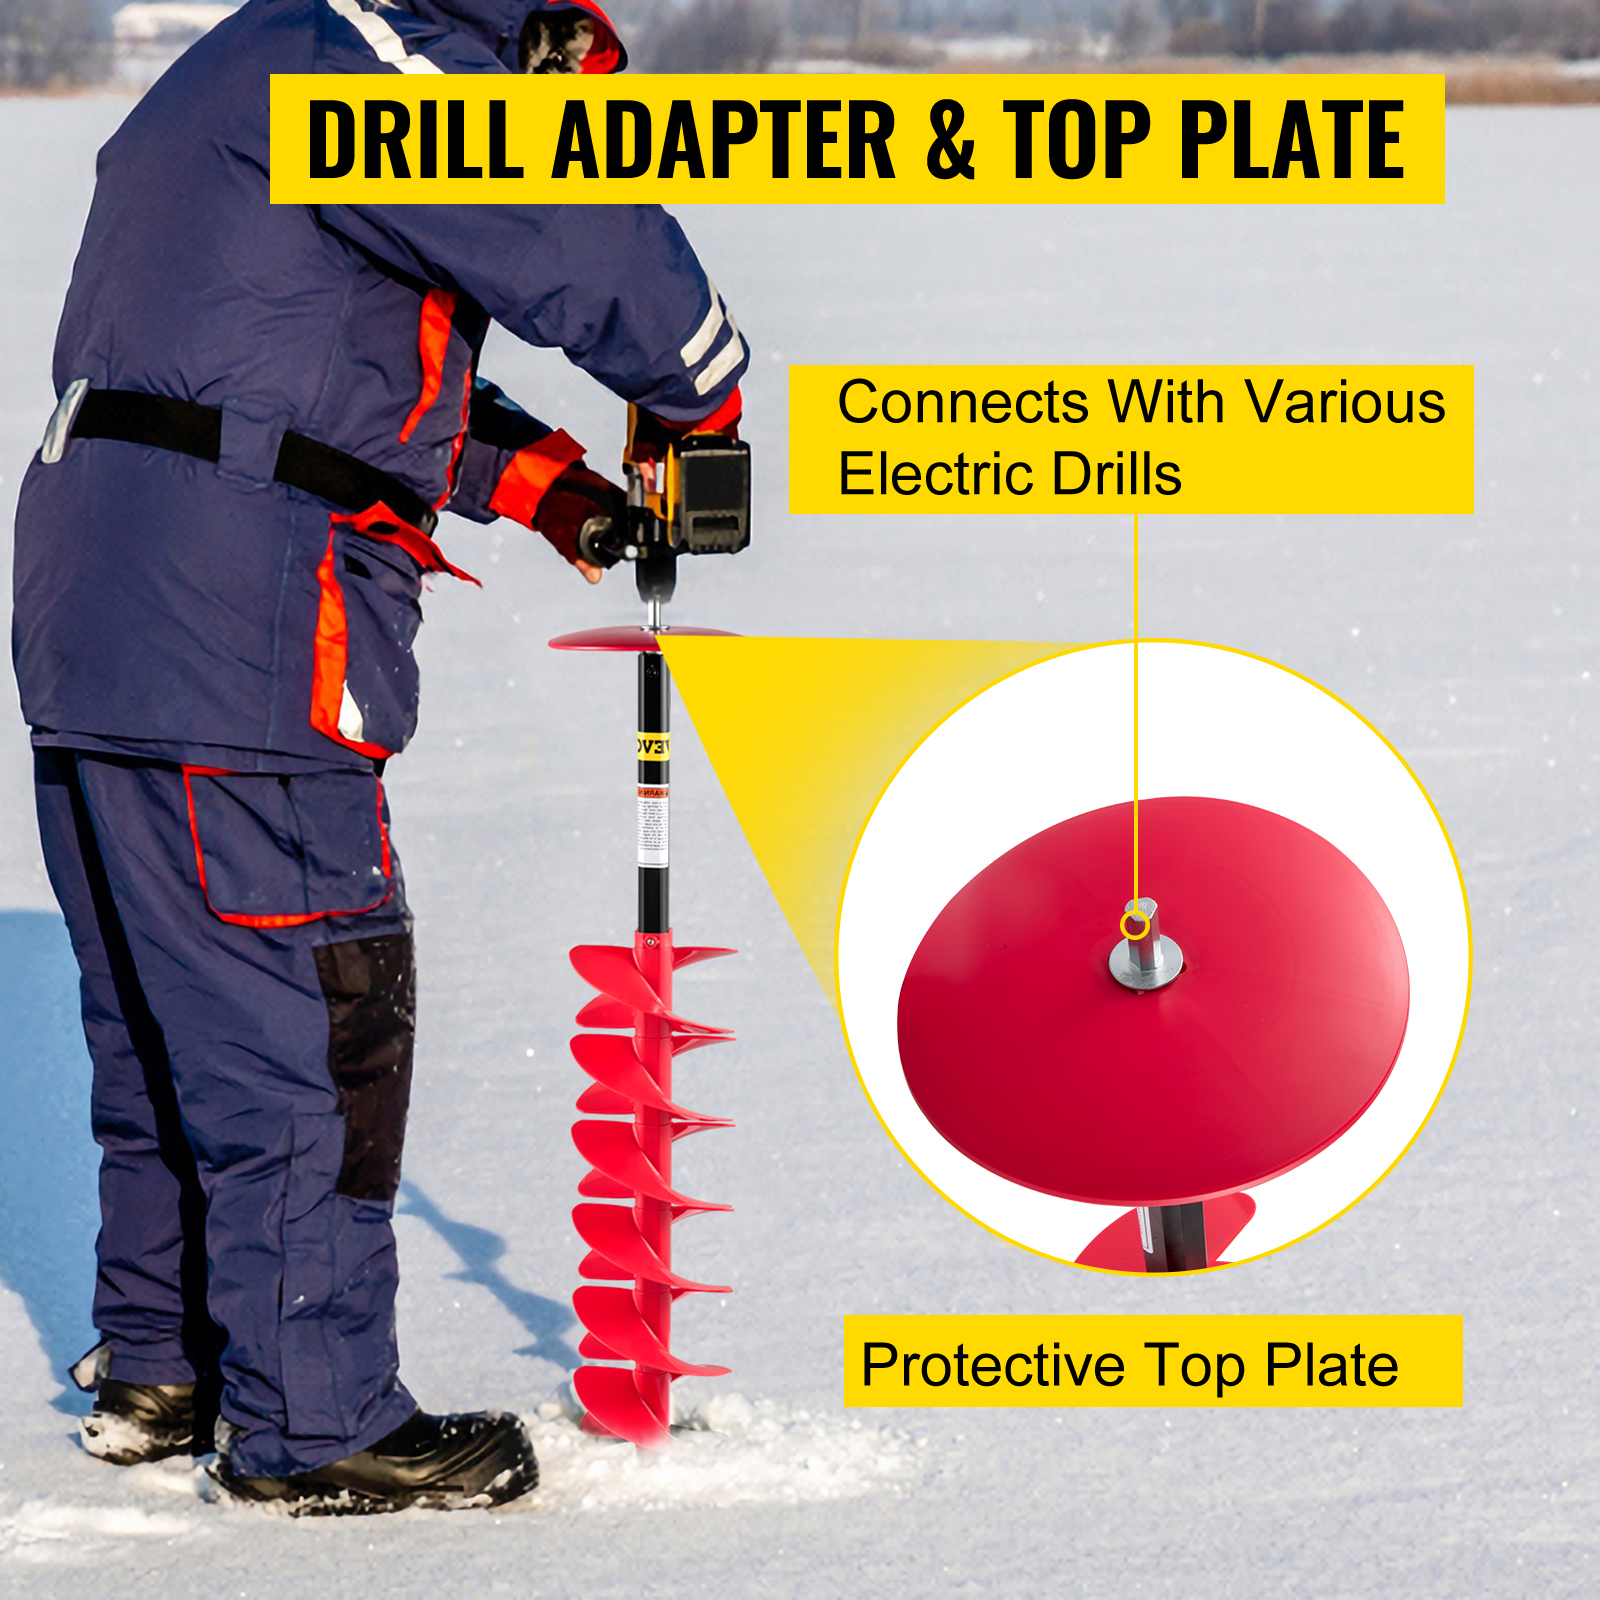 https://d2qc09rl1gfuof.cloudfront.net/product/BZHSNLYC39348TWTL/ice-drill-auger-m100-5.jpg